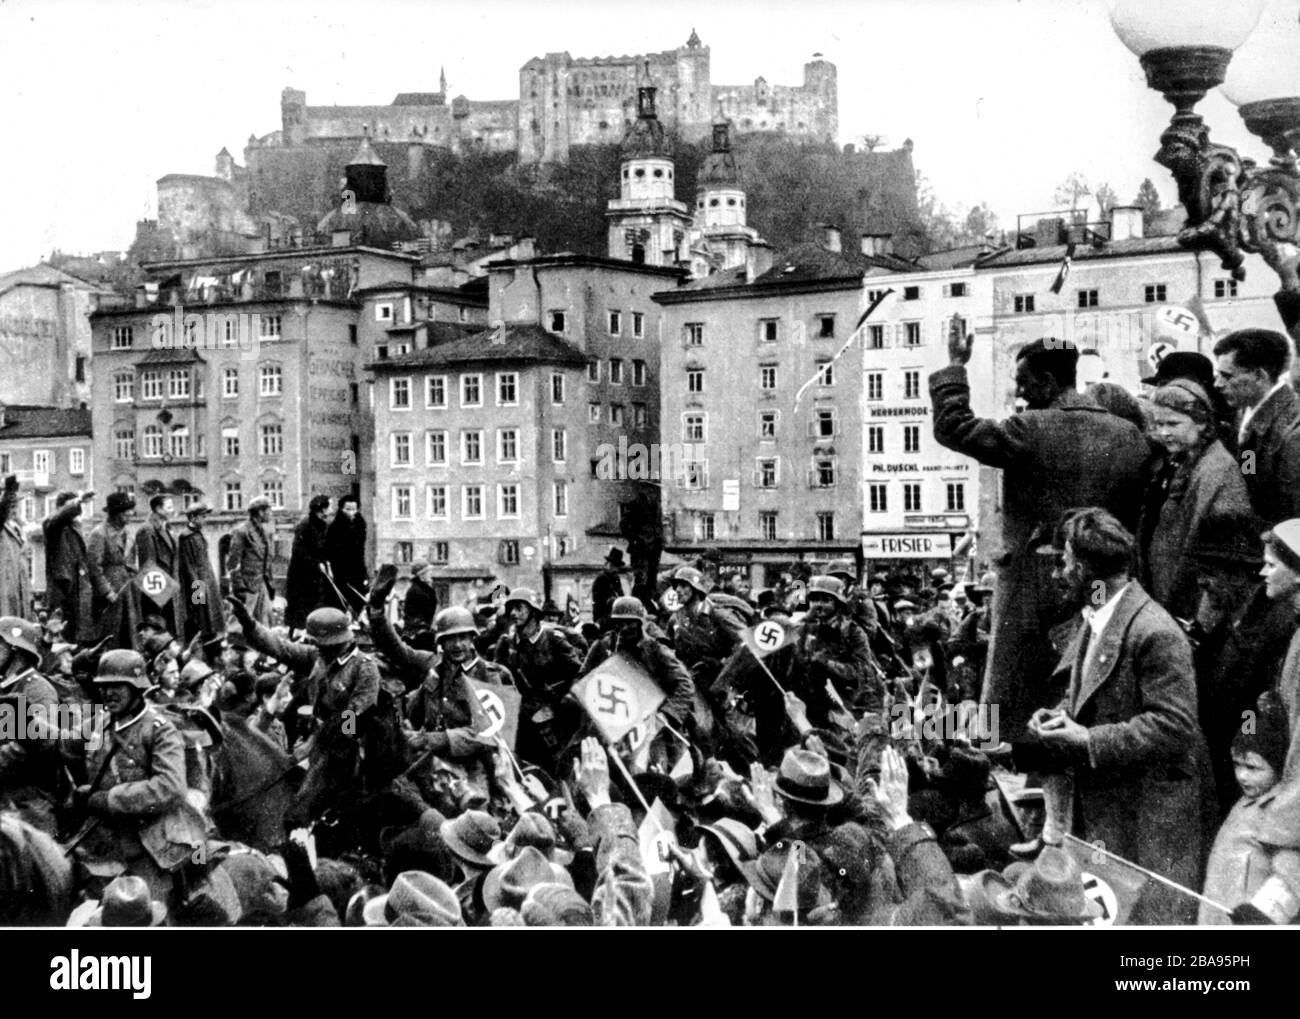 anschluss, after the occupation of Austria by German troops the Austrian population greets the German brothers, 1938 Stock Photo